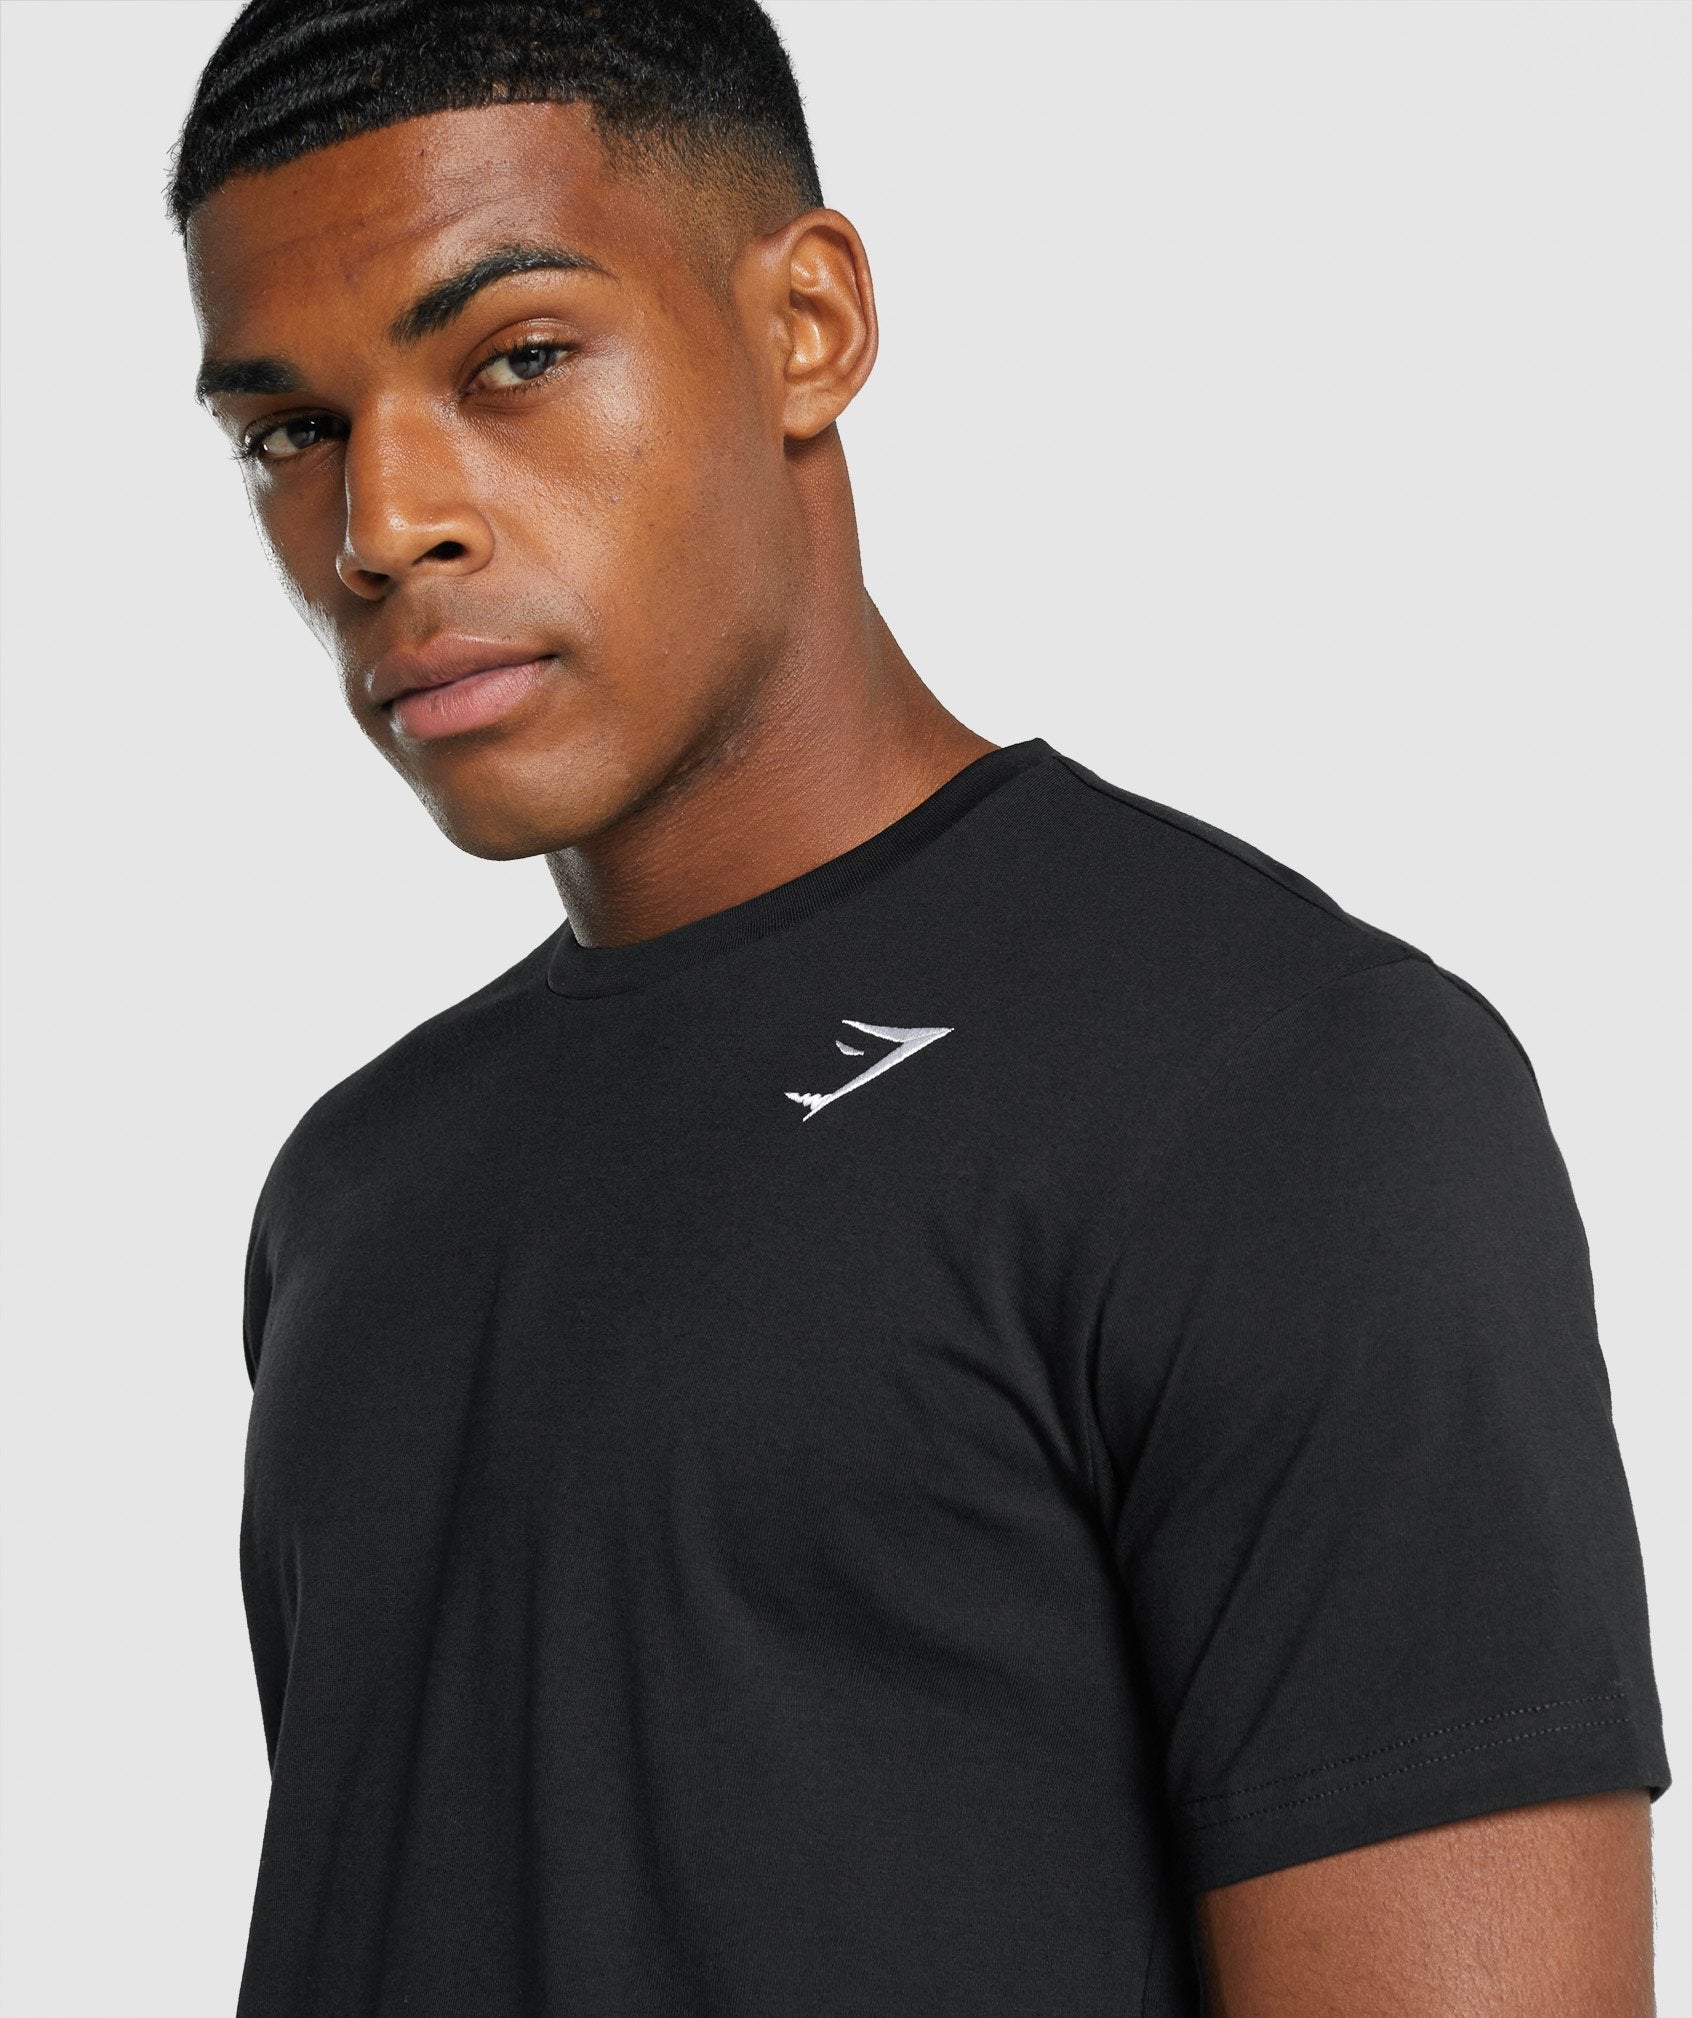 Crest T-Shirt in Black - view 5